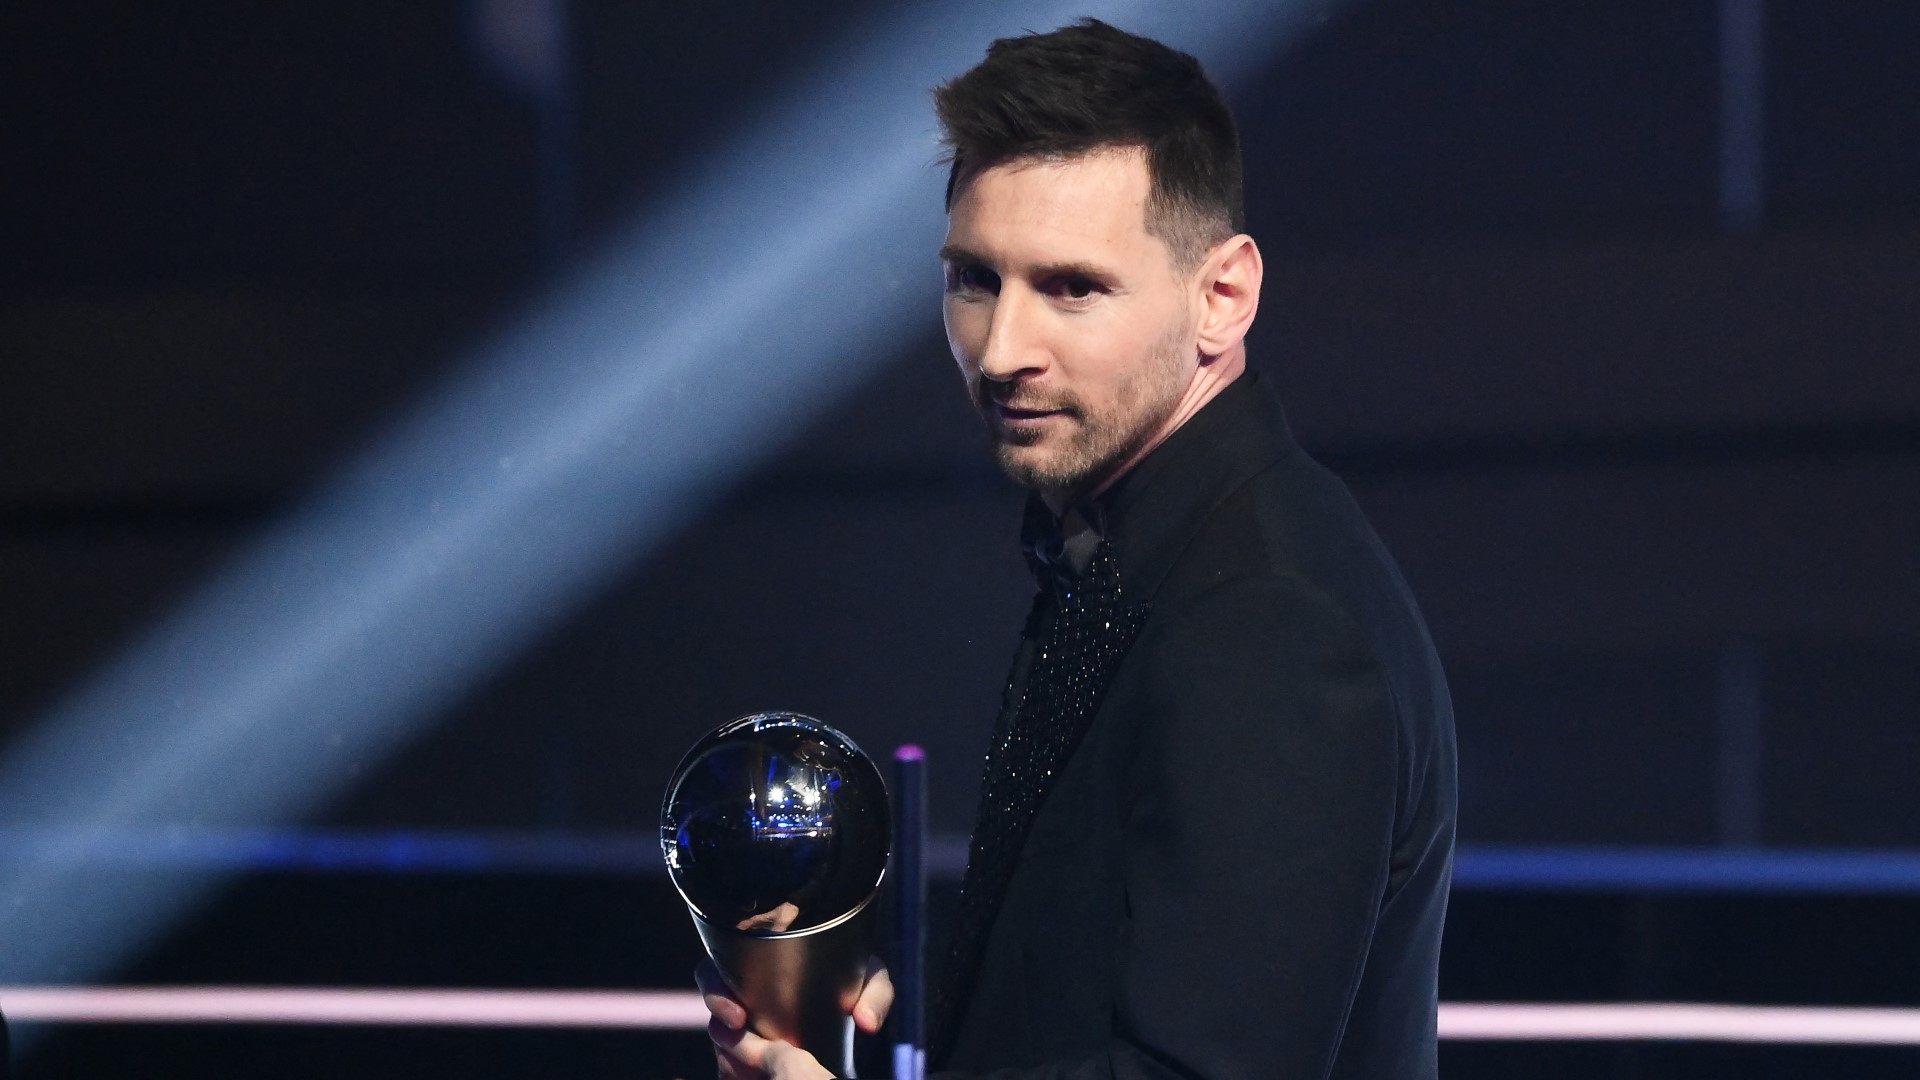 Simply The Best? Why Messi isn't the favorite in FIFA's awards